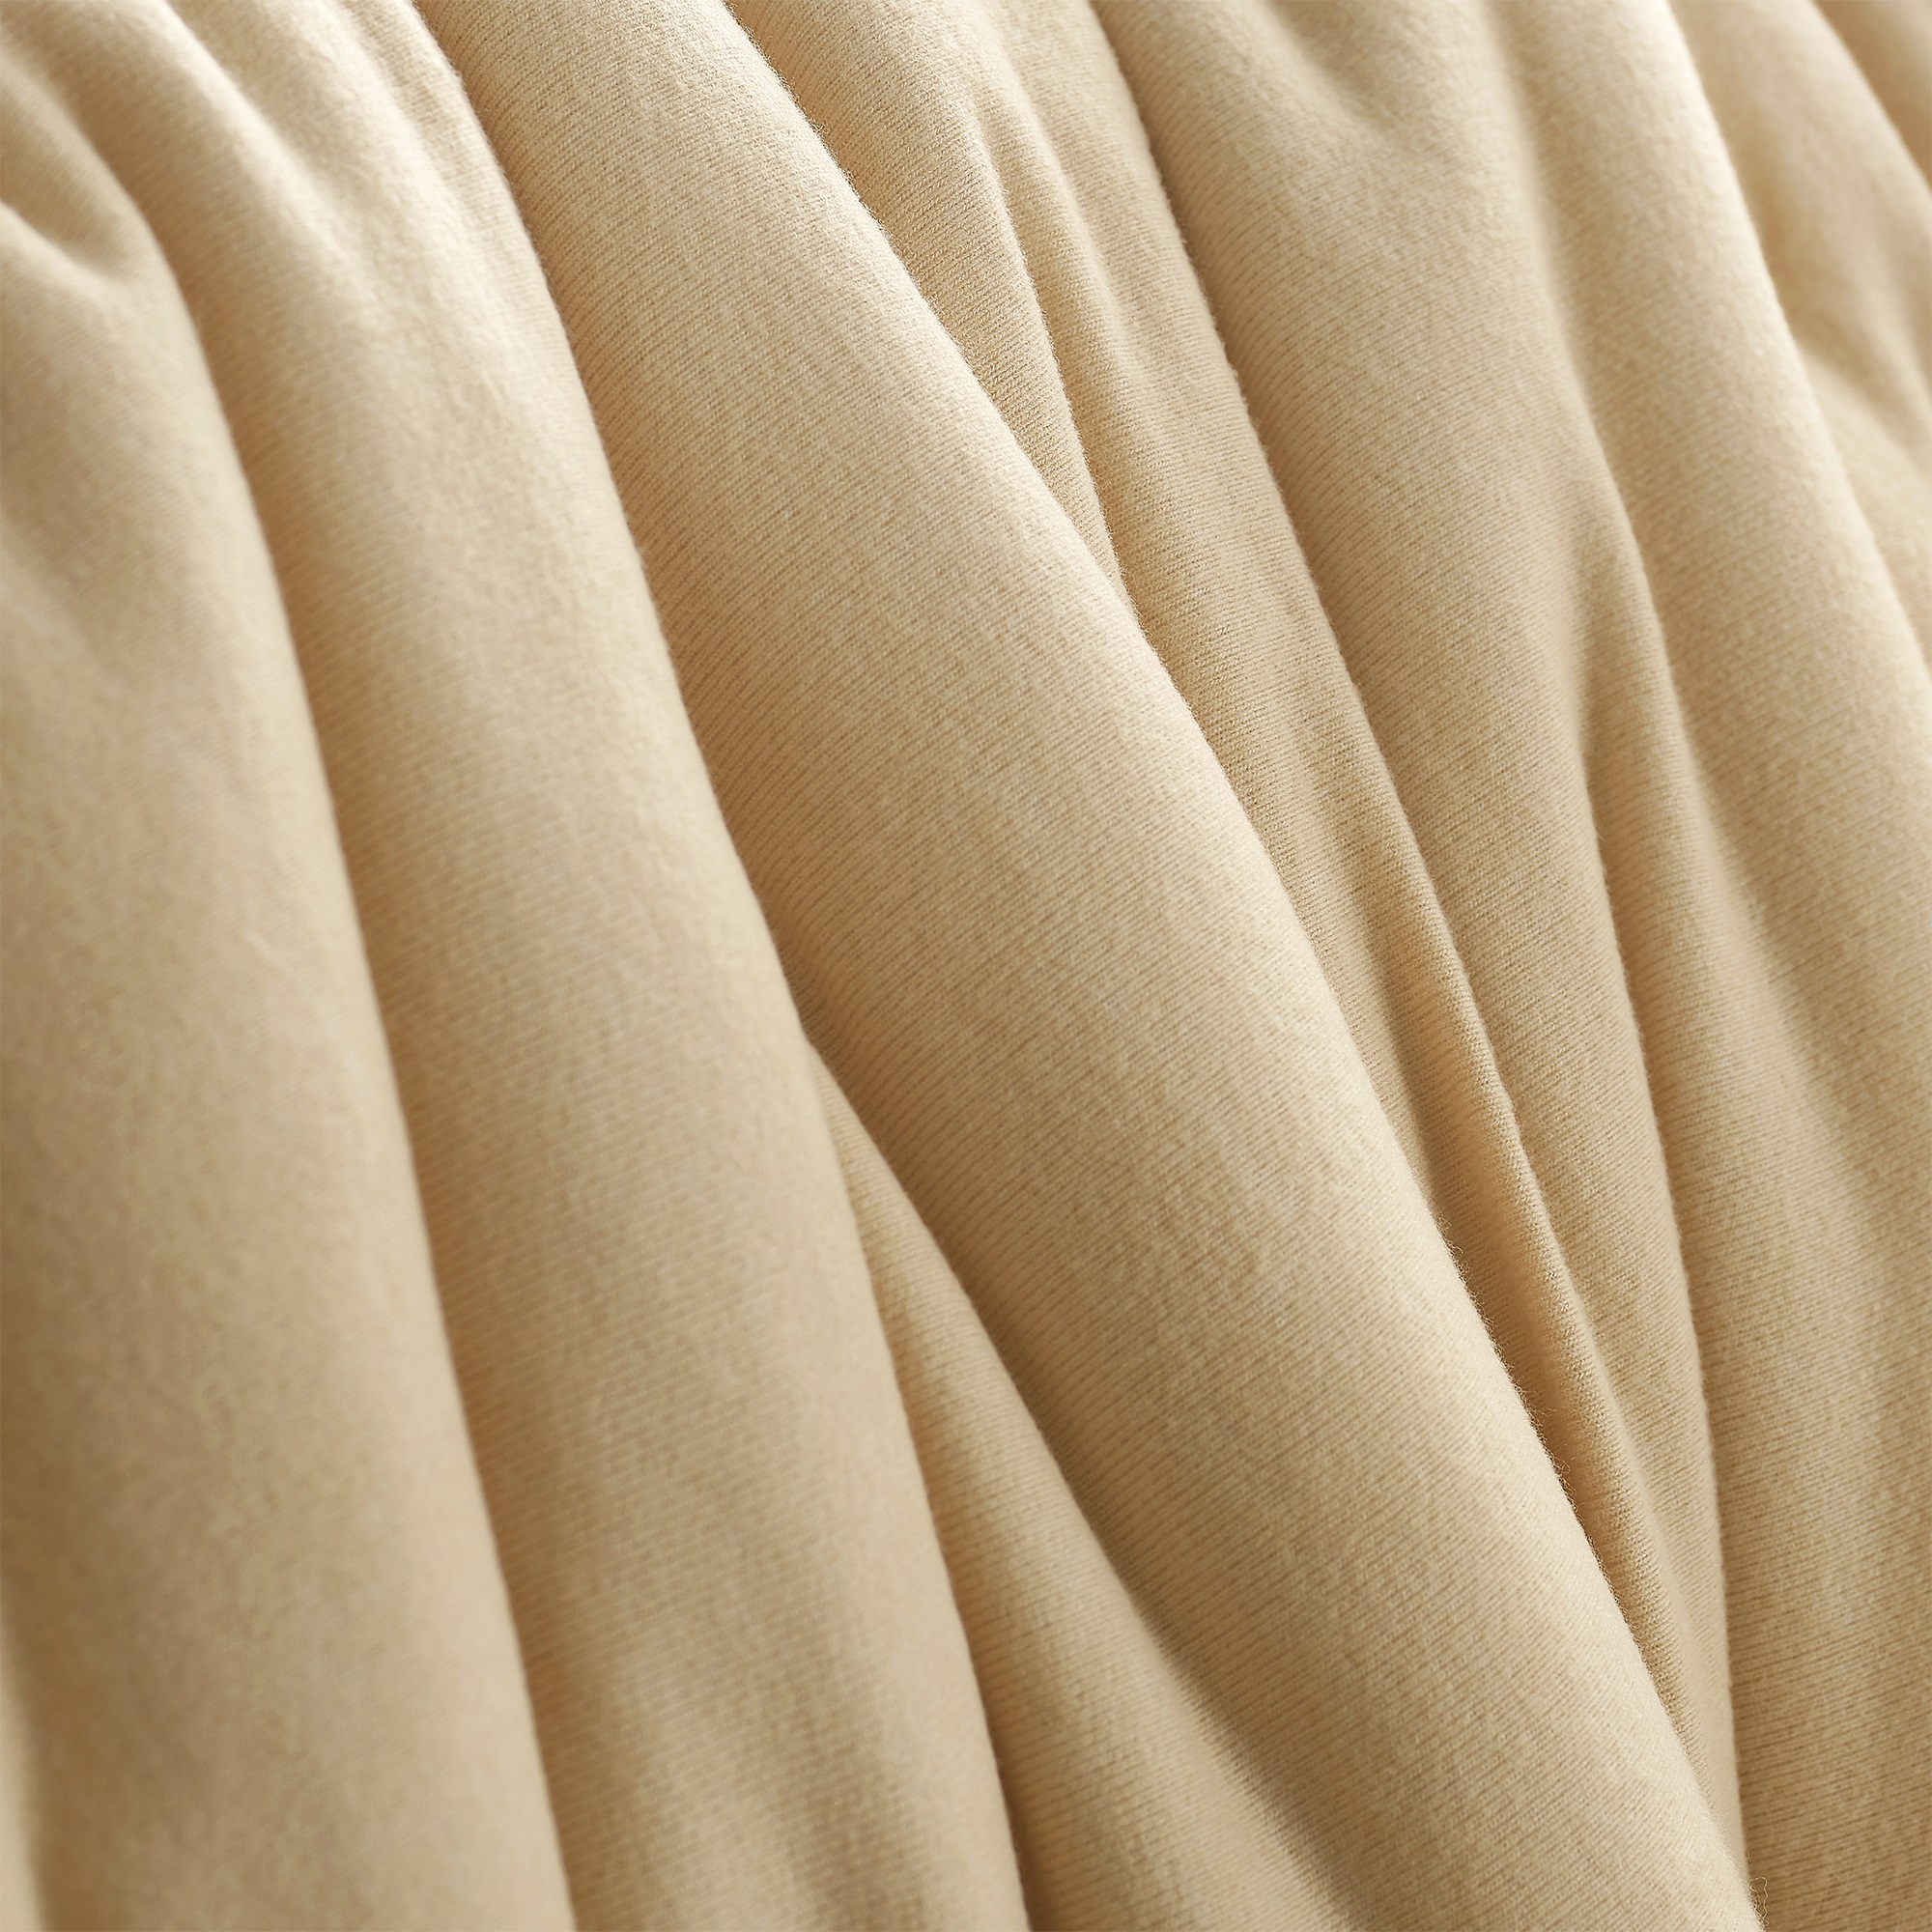 Wool-Ness - Coma Inducer?? Oversized Comforter - Gilded Beige